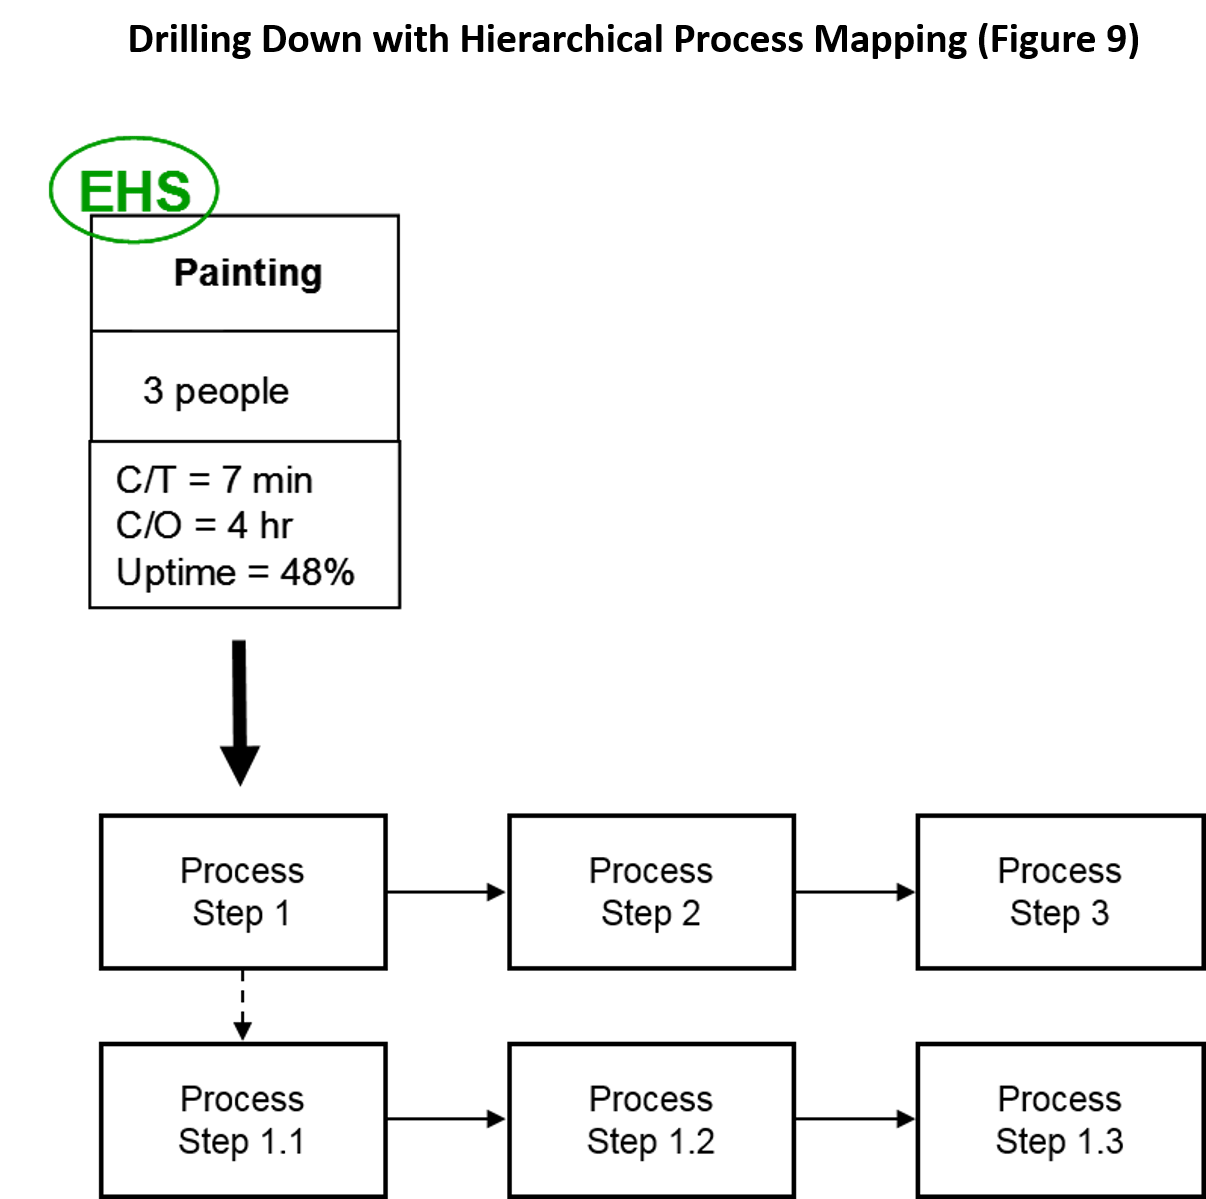 Drilling Down with Hierarchical Process Mapping (Figure 9)